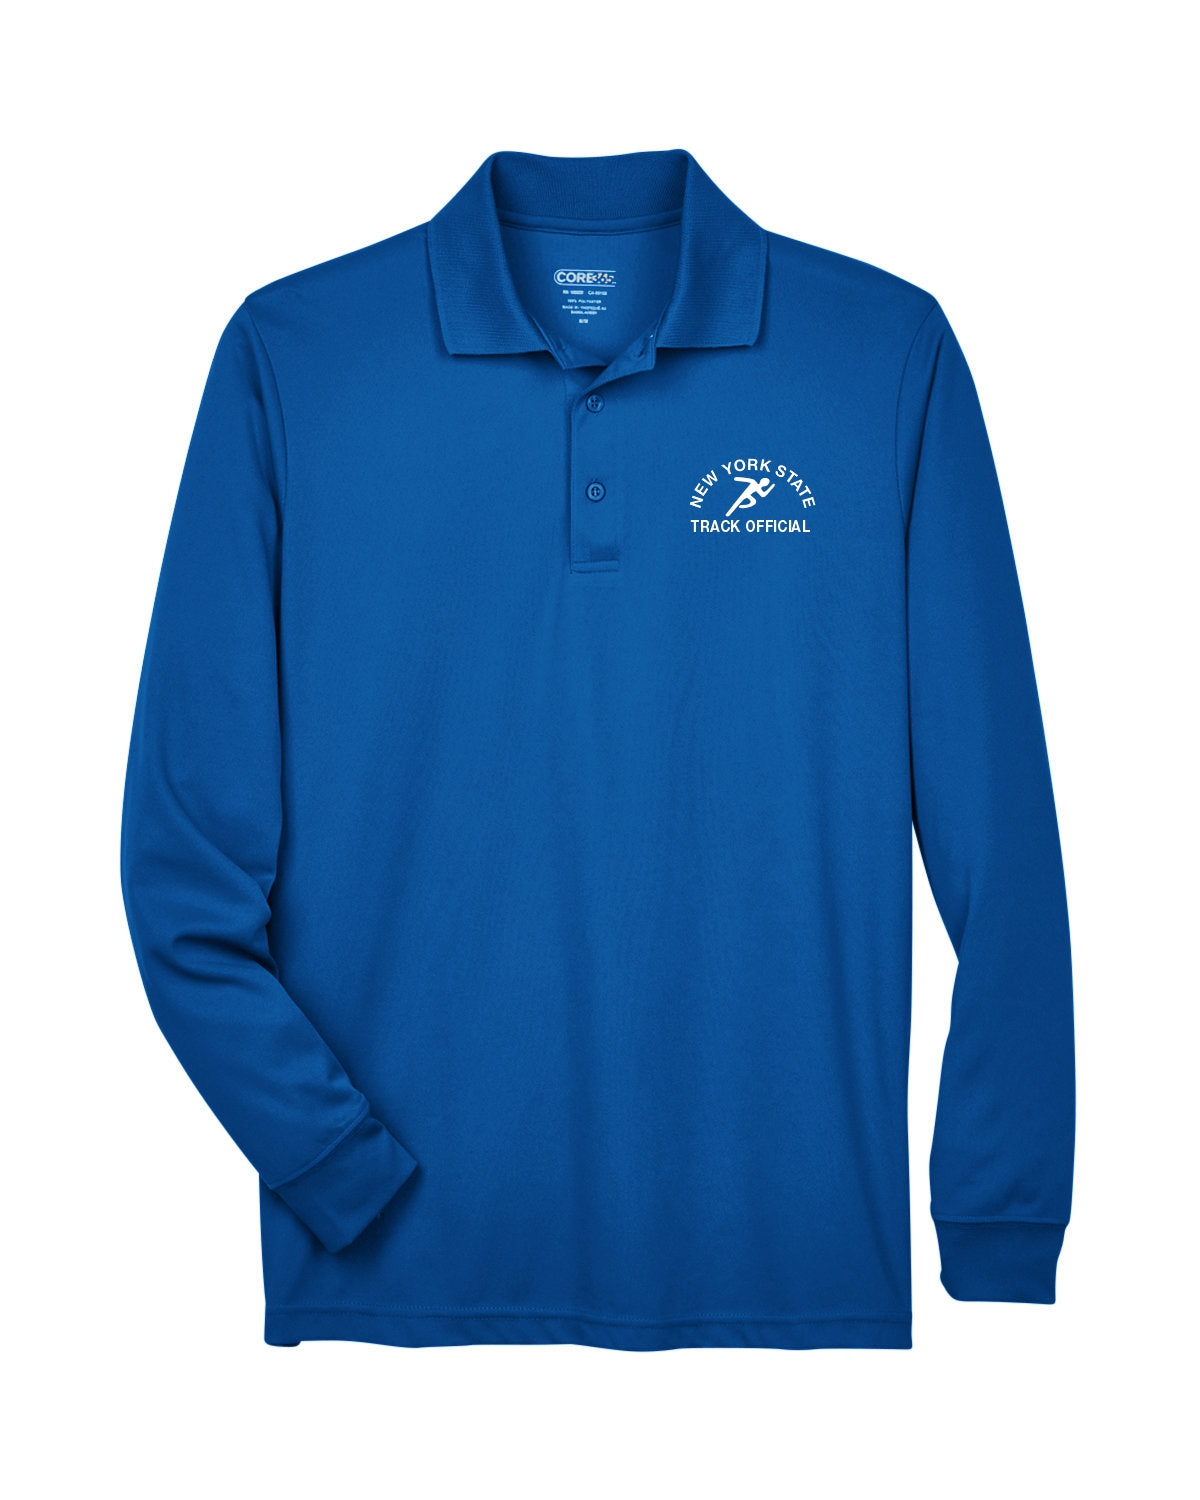 NYS Track Officials Men's Embroidered Longsleeve Performance Polo